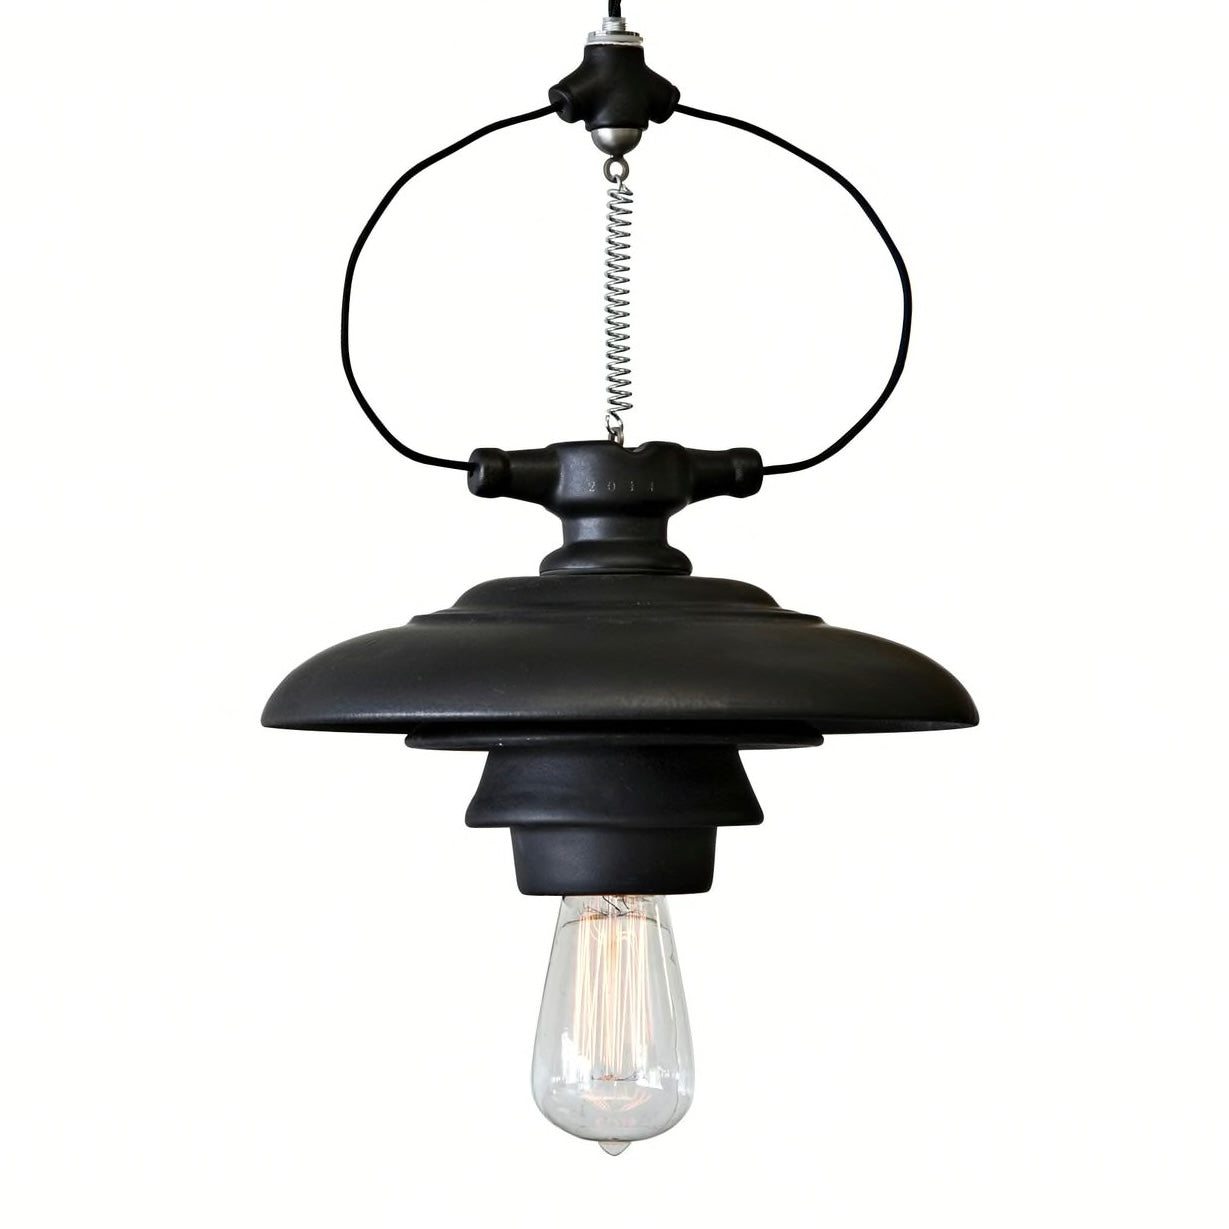 Battersea 953BS Ceiling Light by Toscot